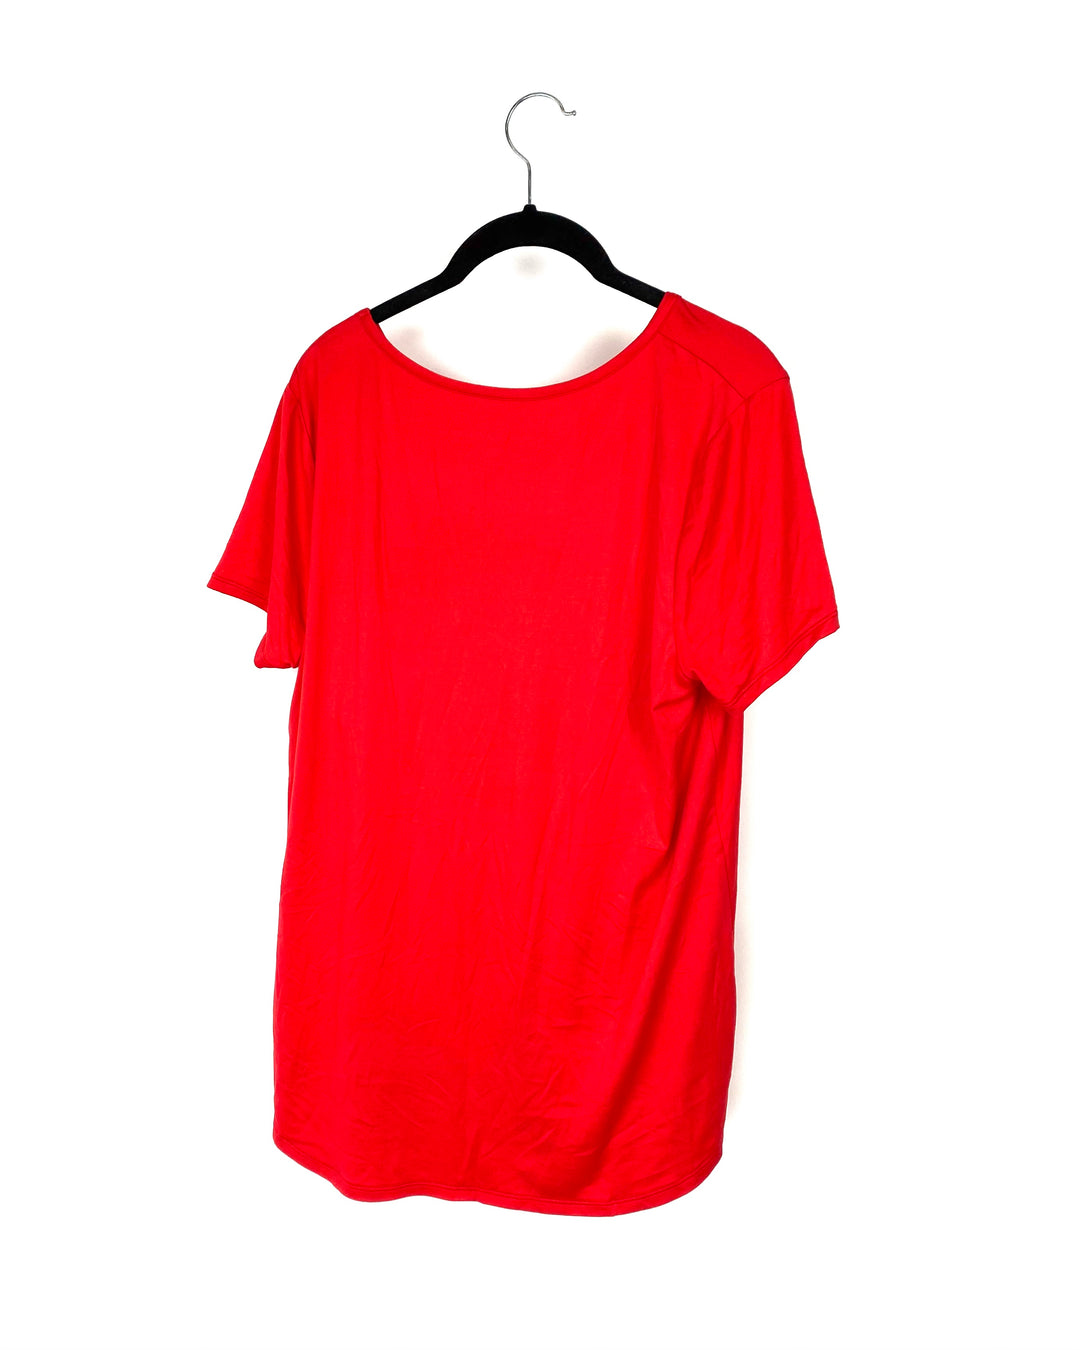 Soft Red T-Shirt - Small And 1X